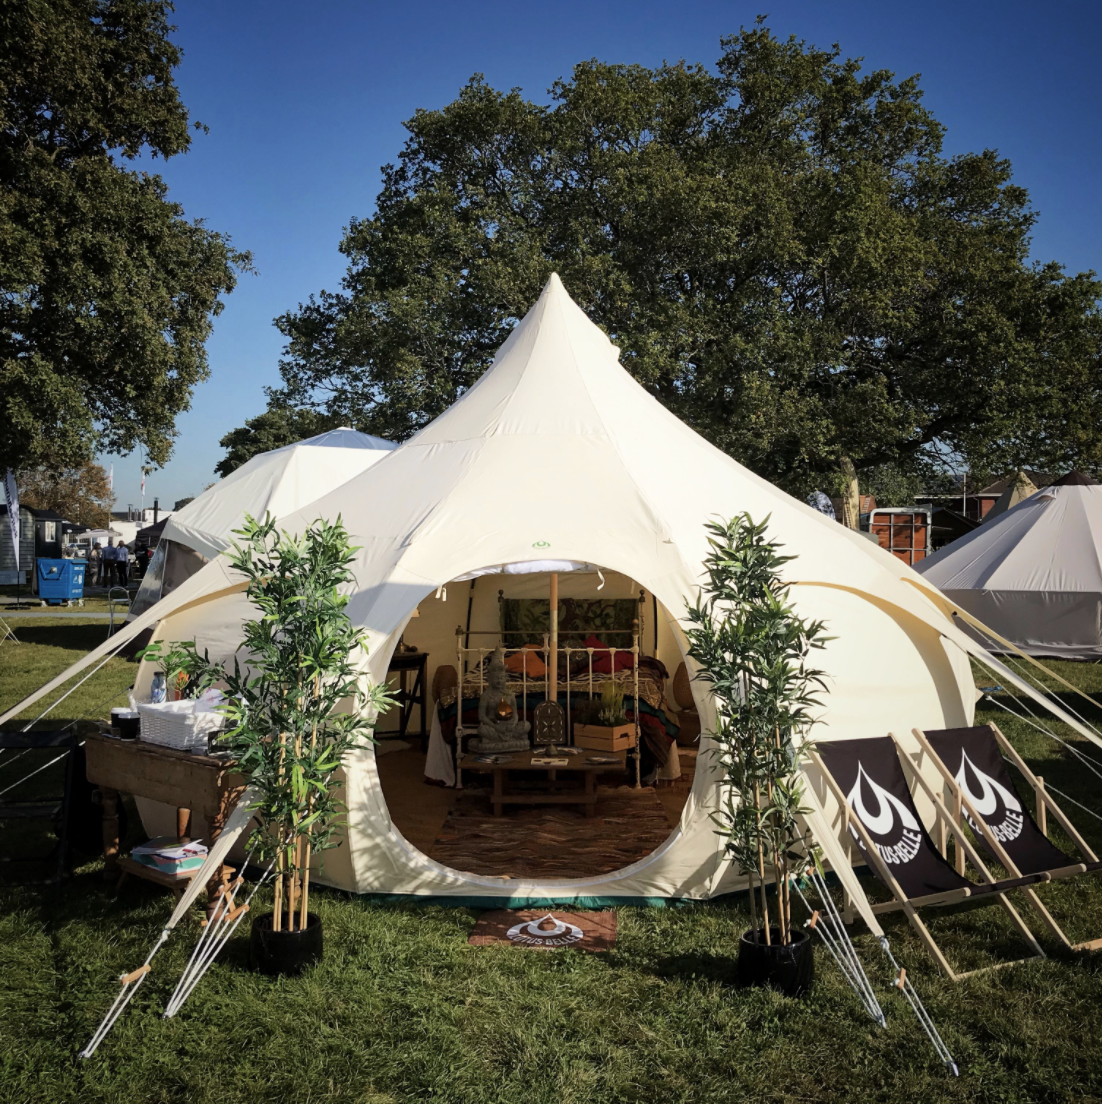 What’s next for UK glamping this summer?